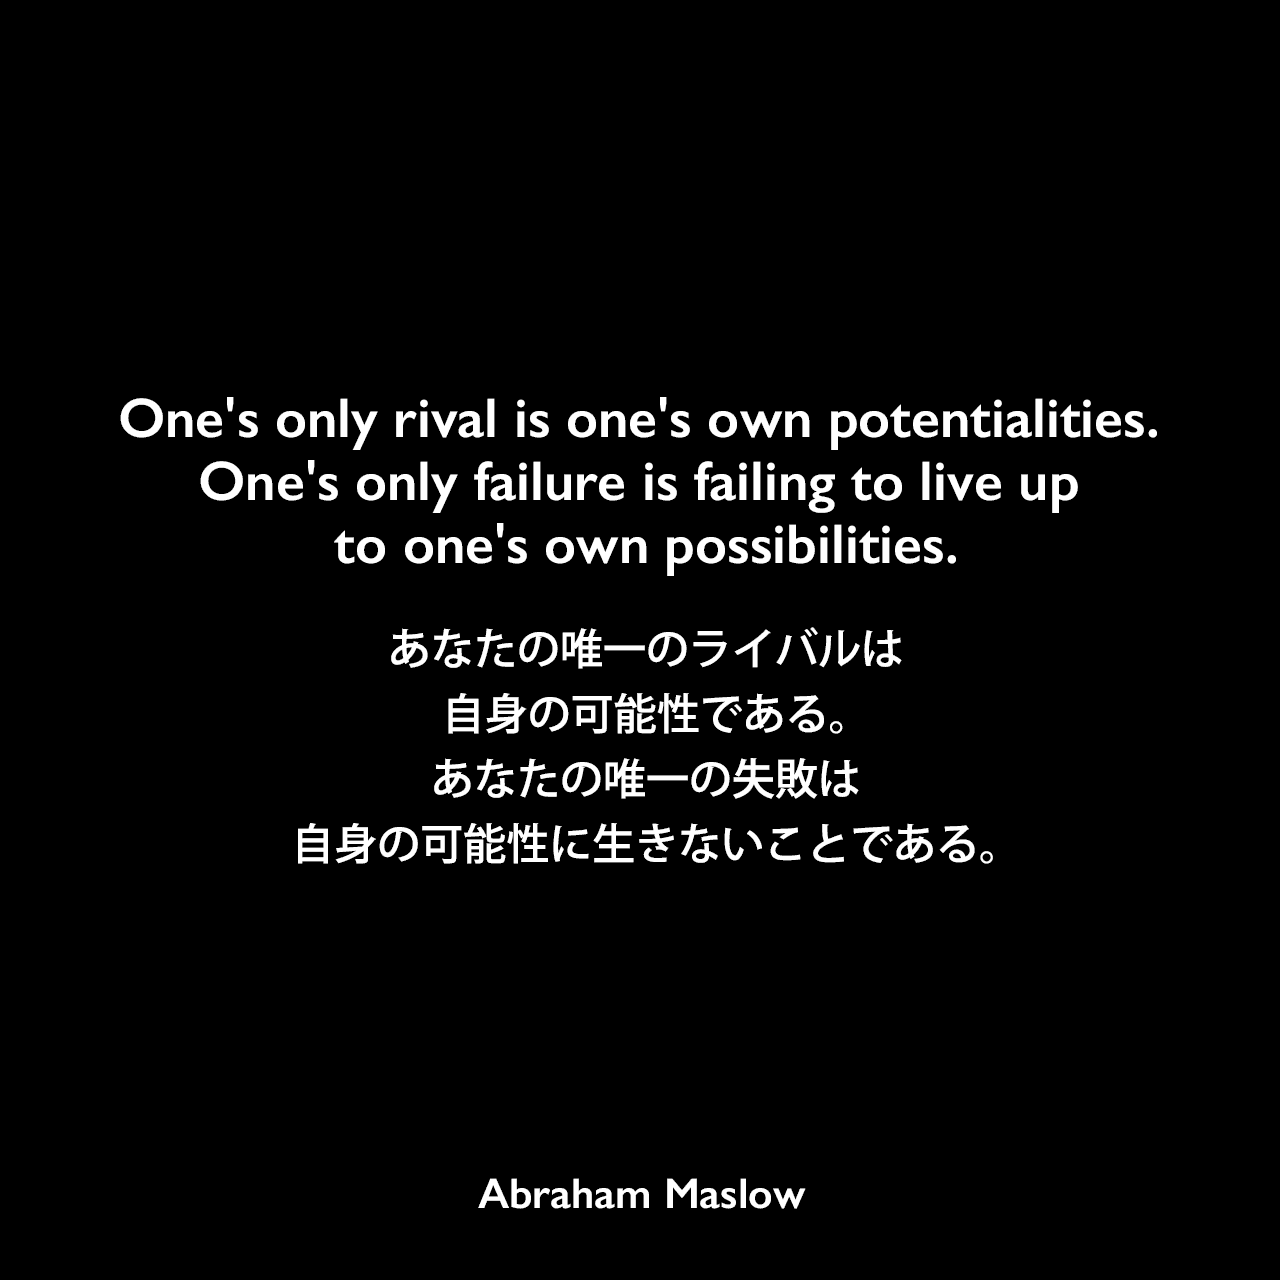 One’s only rival is one’s own potentialities. One’s only failure is failing to live up to one’s own possibilities.あなたの唯一のライバルは自身の可能性である。あなたの唯一の失敗は自身の可能性に生きないことである。